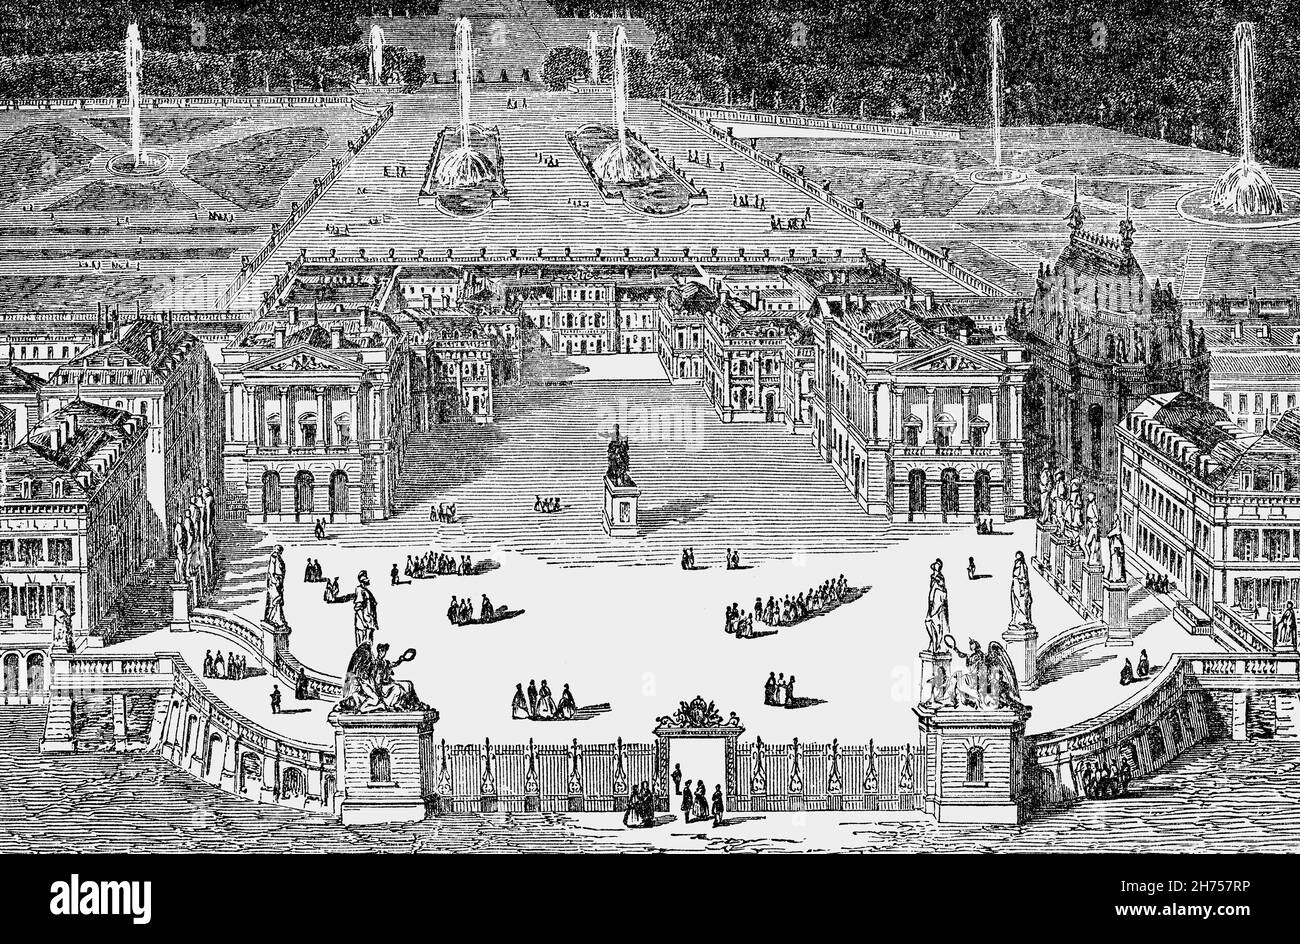 A late 19th Century aerial illustration of the Palace and gardens at Versailles, a former royal residence located in Versailles, about 12 miles west of Paris, France. In 1623 Louis XIII built a simple hunting lodge on the site of the palace, then replaced it with a small château in 1631–34. Louis XIV expanded the château into a palace and in 1682, Louis XIV moved his court and government to Versailles, making the palace the de facto capital of France. It was continued by Kings Louis XV and Louis XVI, but in 1789 the royal family and capital of France returned to Paris. Stock Photo